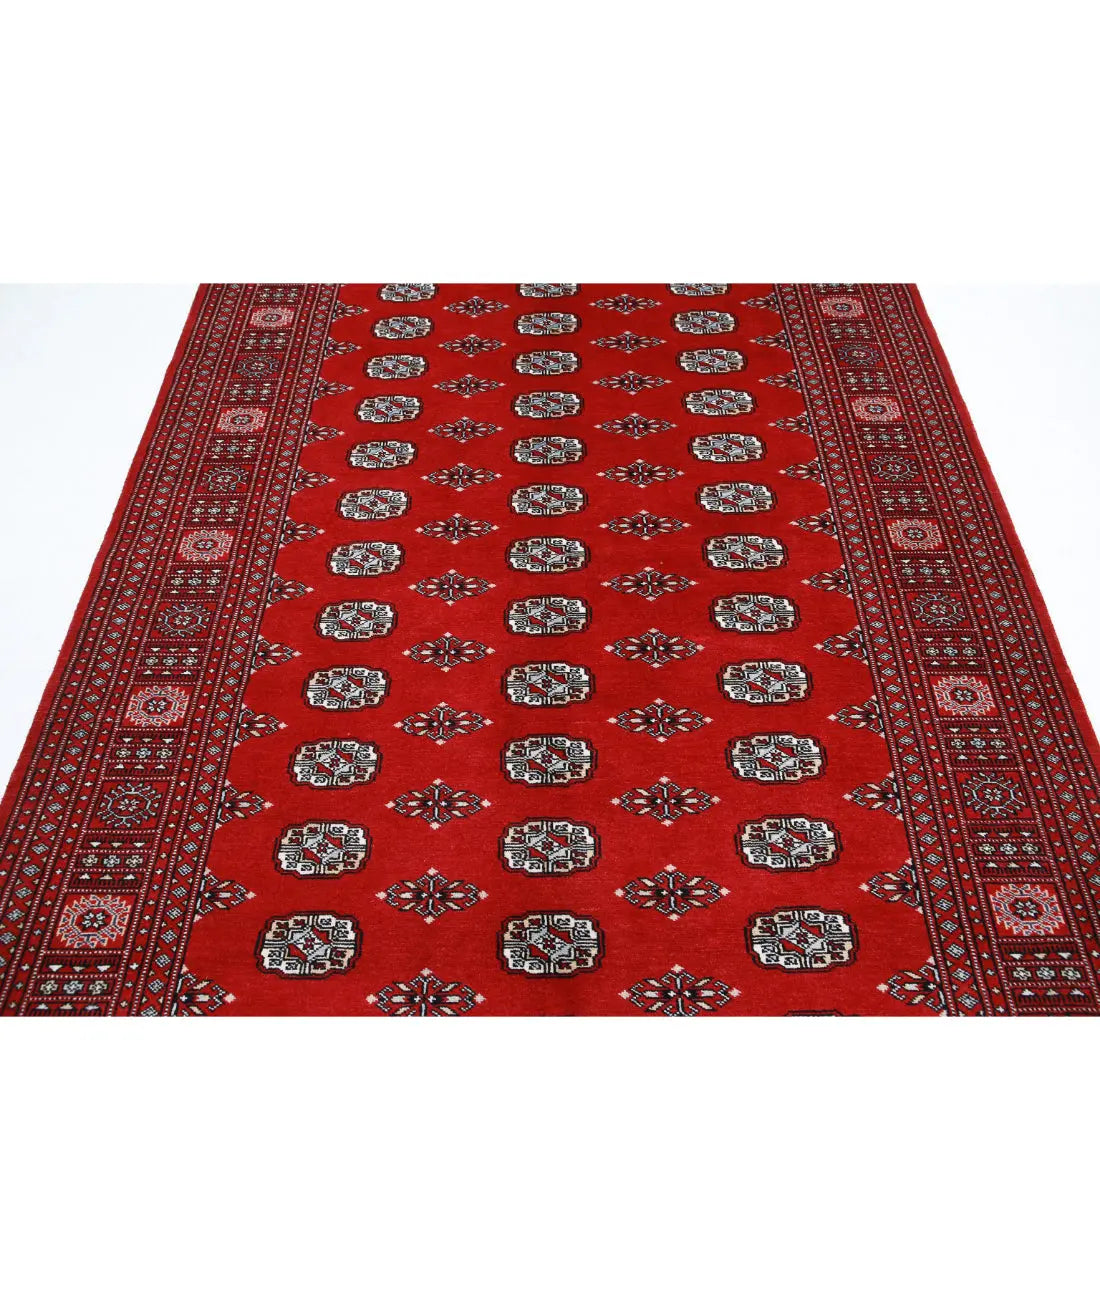 Hand Knotted Tribal Bokhara Wool Rug - 5'9'' x 8'3''